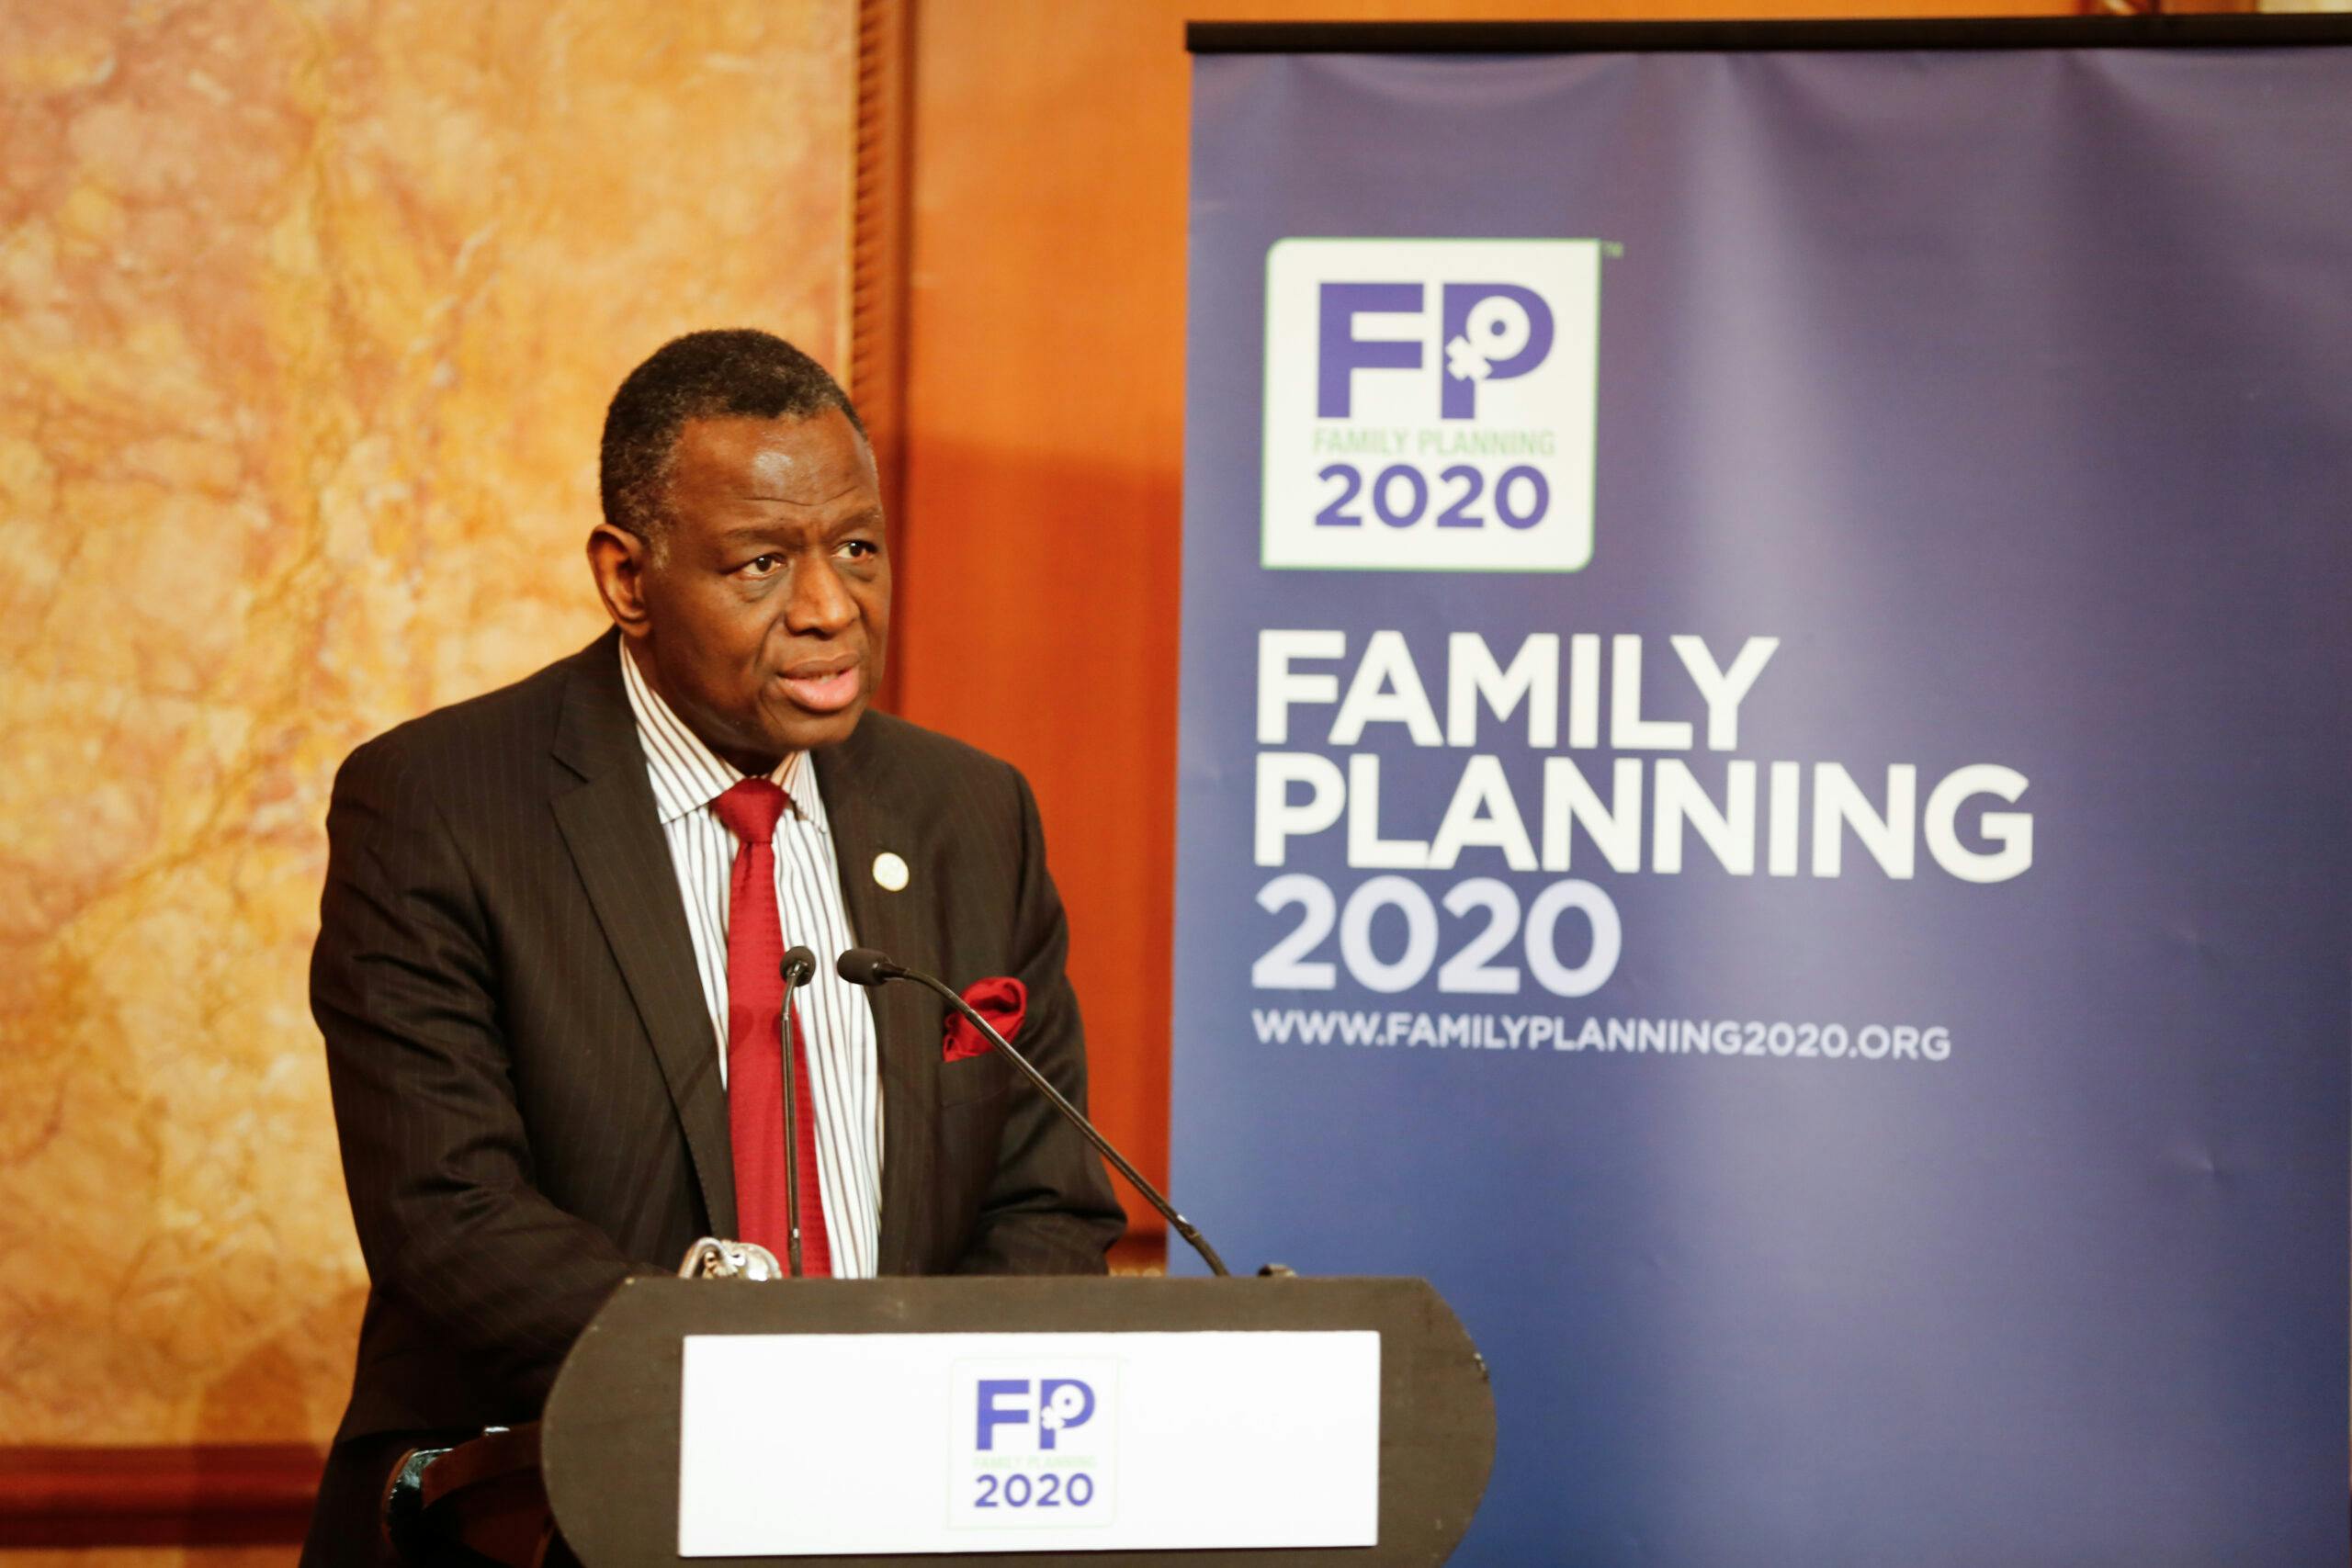 FP2020 Reference Group Calls for Renewal